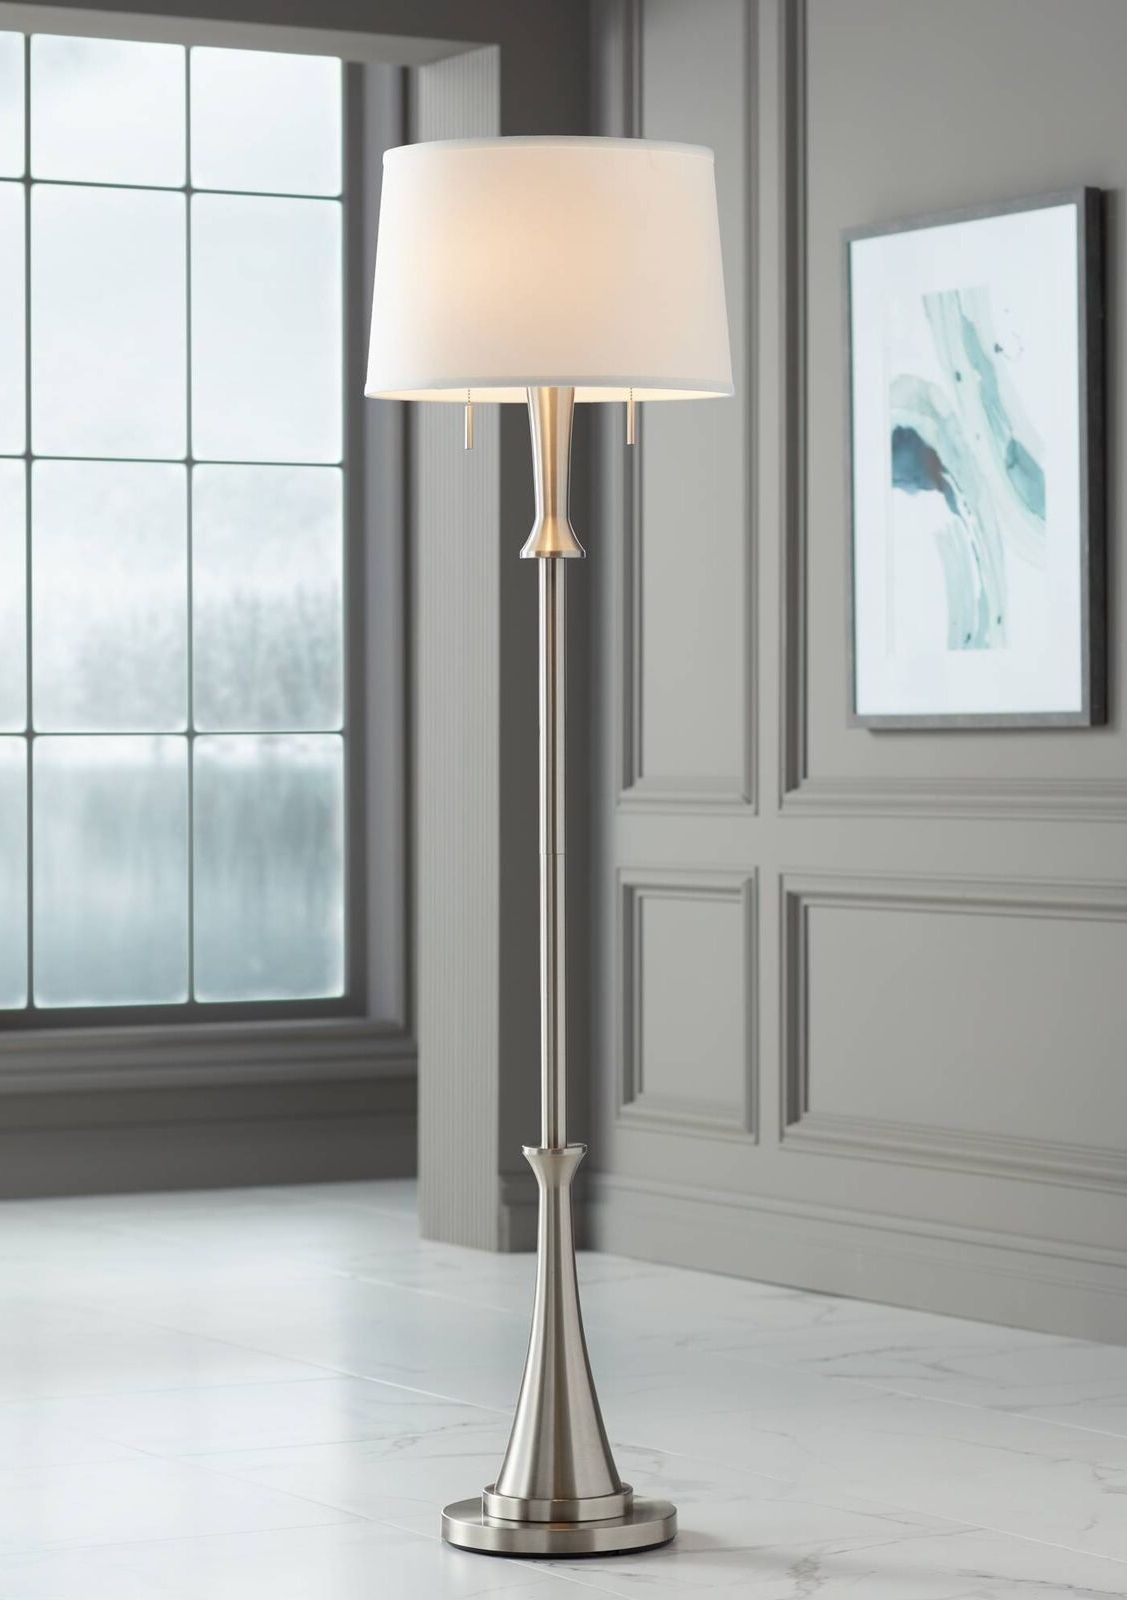 Modern Floor Lamp Brushed Nickel White Drum Shade For Living Room Reading  House | Ebay Within Glass Satin Nickel Floor Lamps (View 9 of 20)